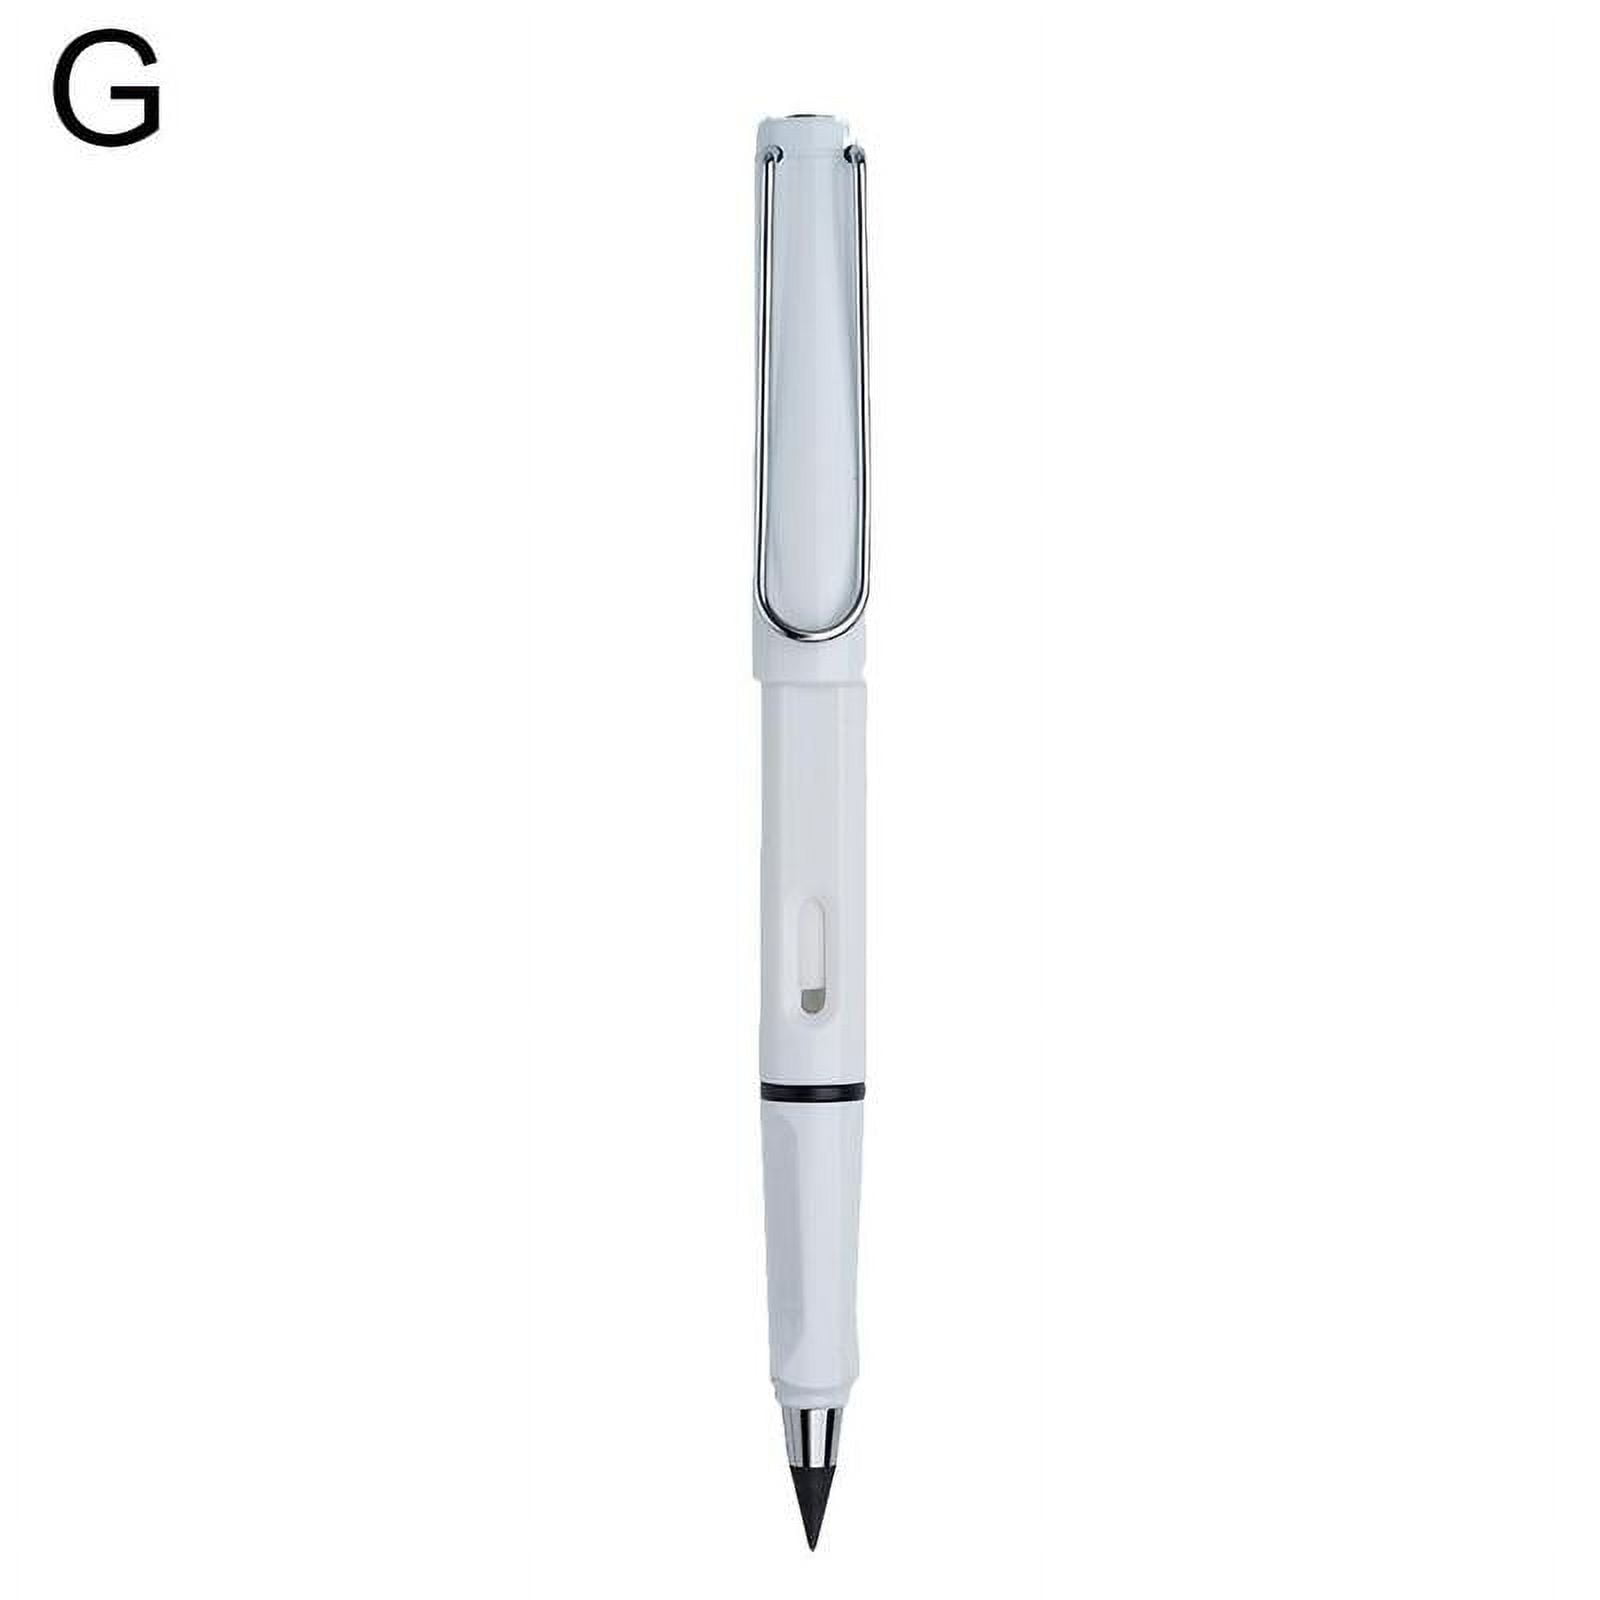 Wholesale Dale Inkless Pen With Creative Design Metal Cutting Toolslic,  Everlasting, Automatic, And Full Metal Cutting Tools With Varnish Accents  From Giftstore888, $2.38